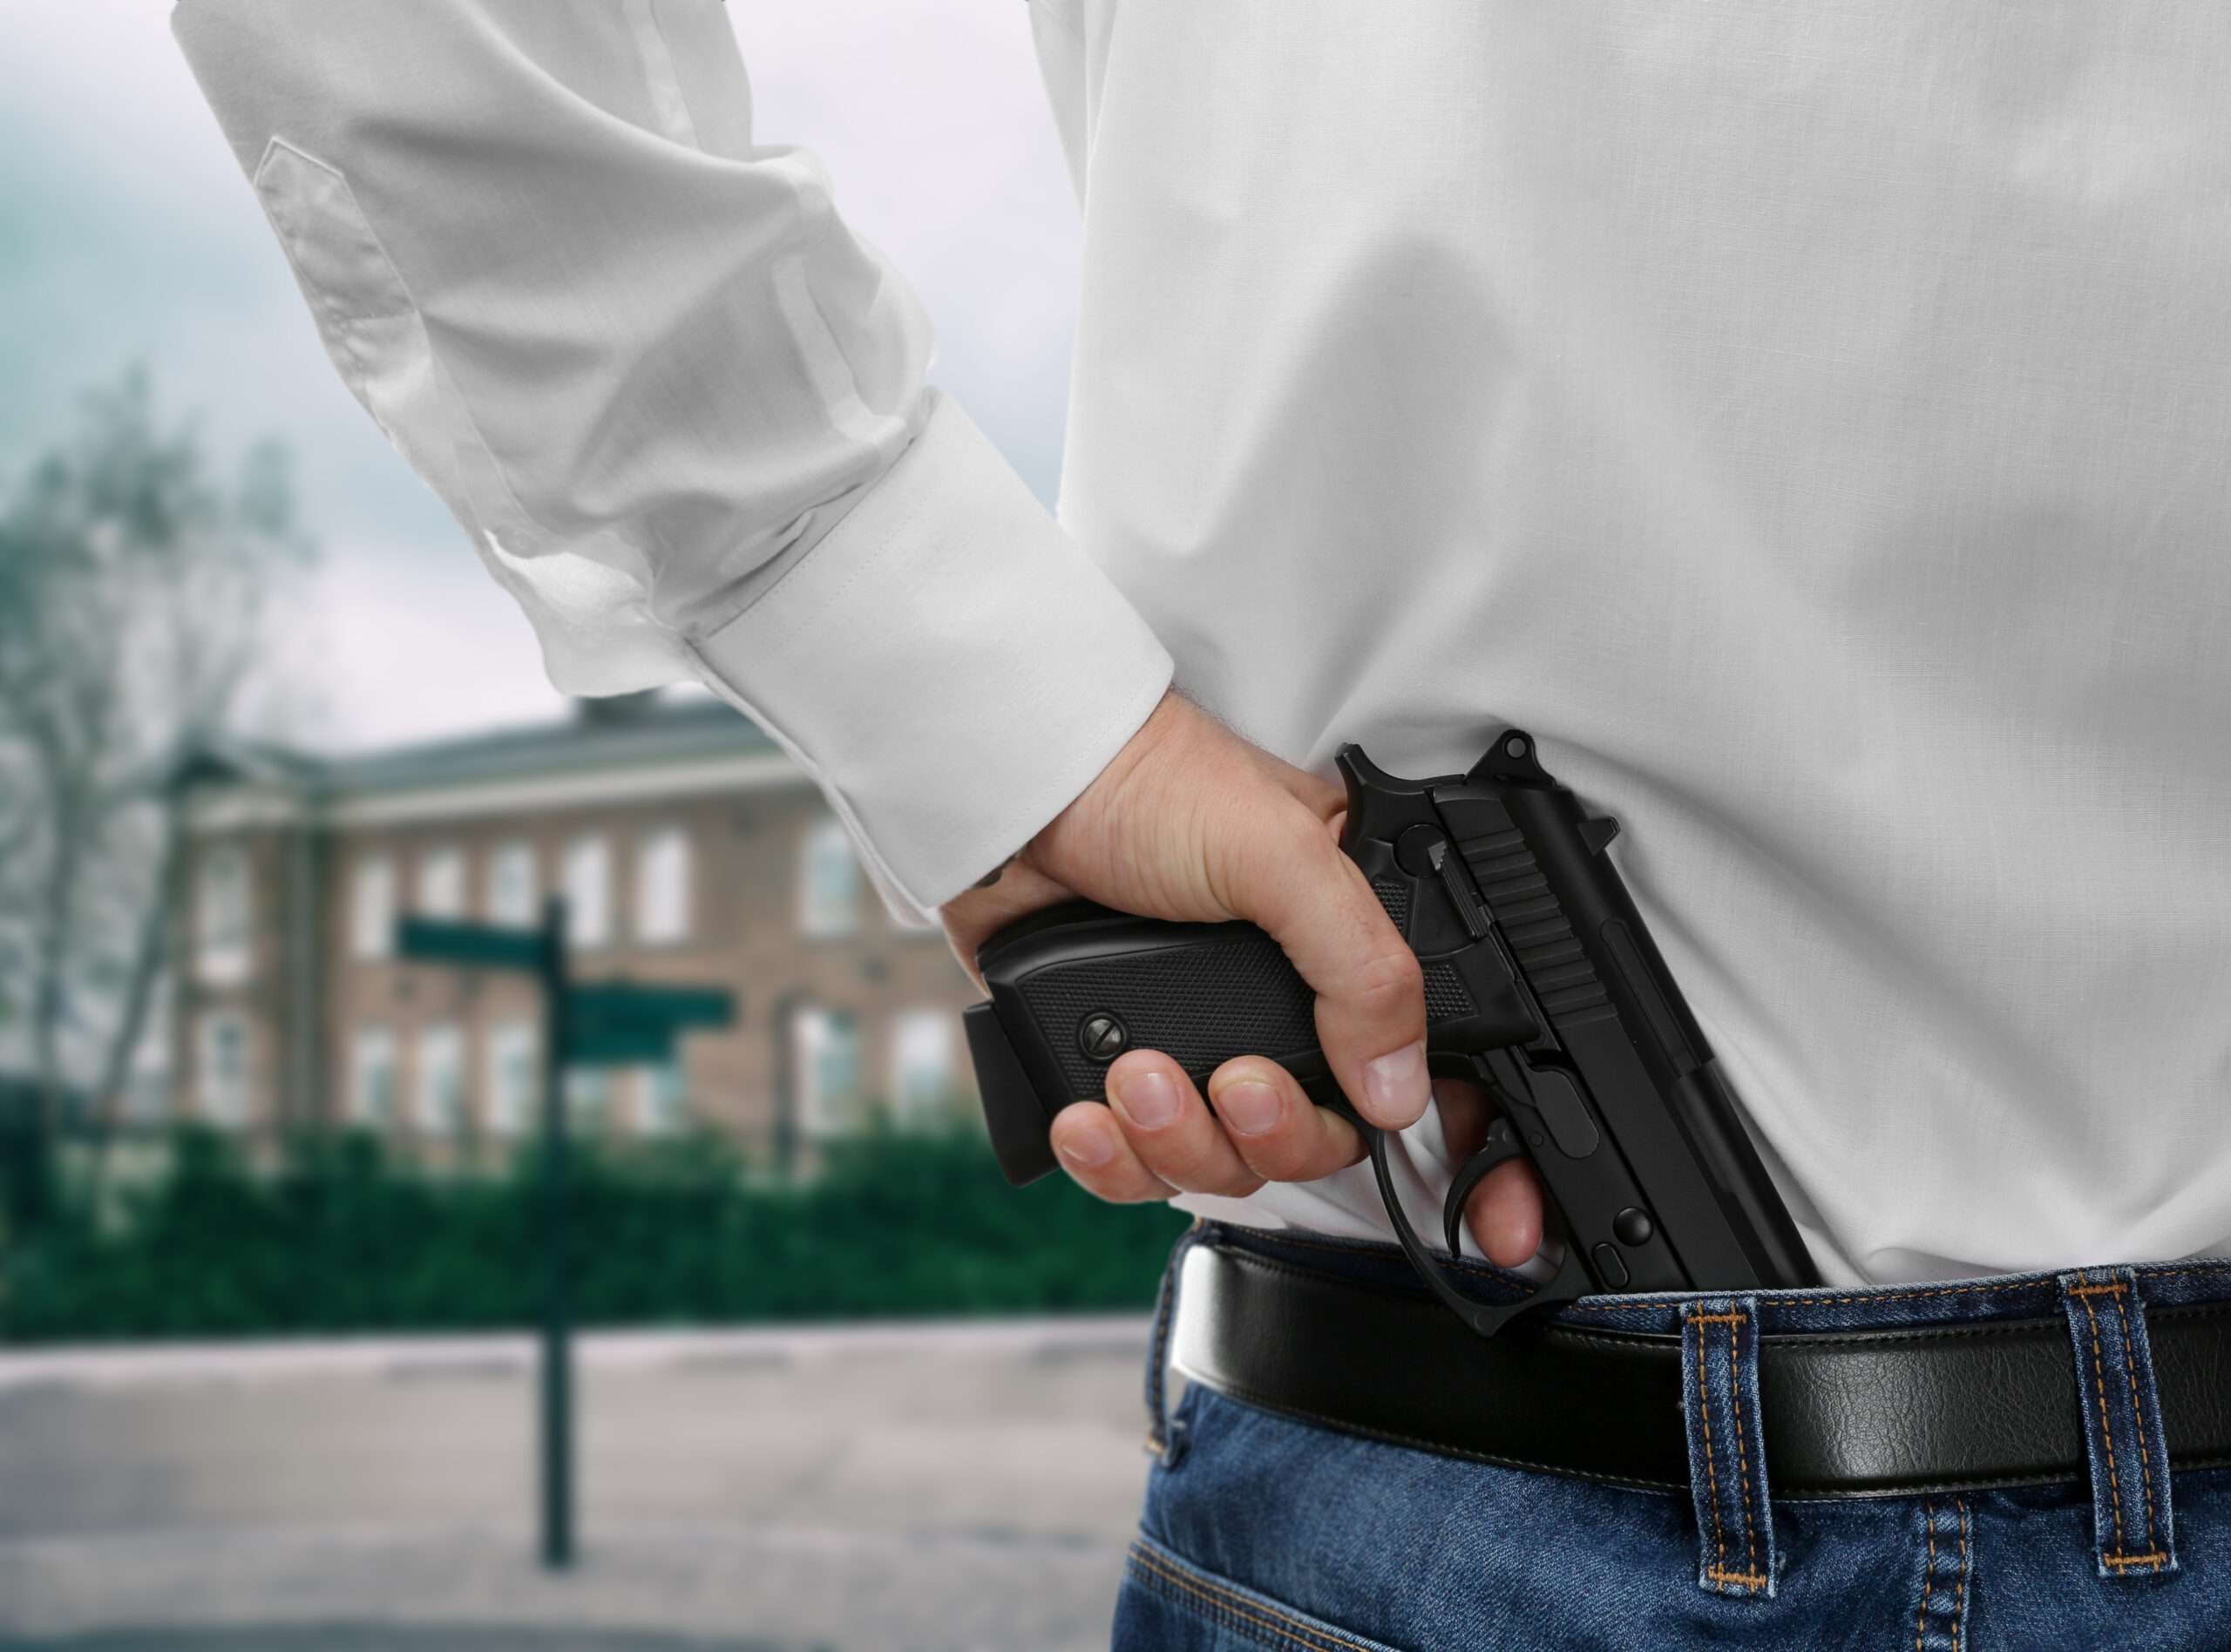 An unrelated bill became a vehicle for allowing concealed weapons on Kentucky’s college campuses